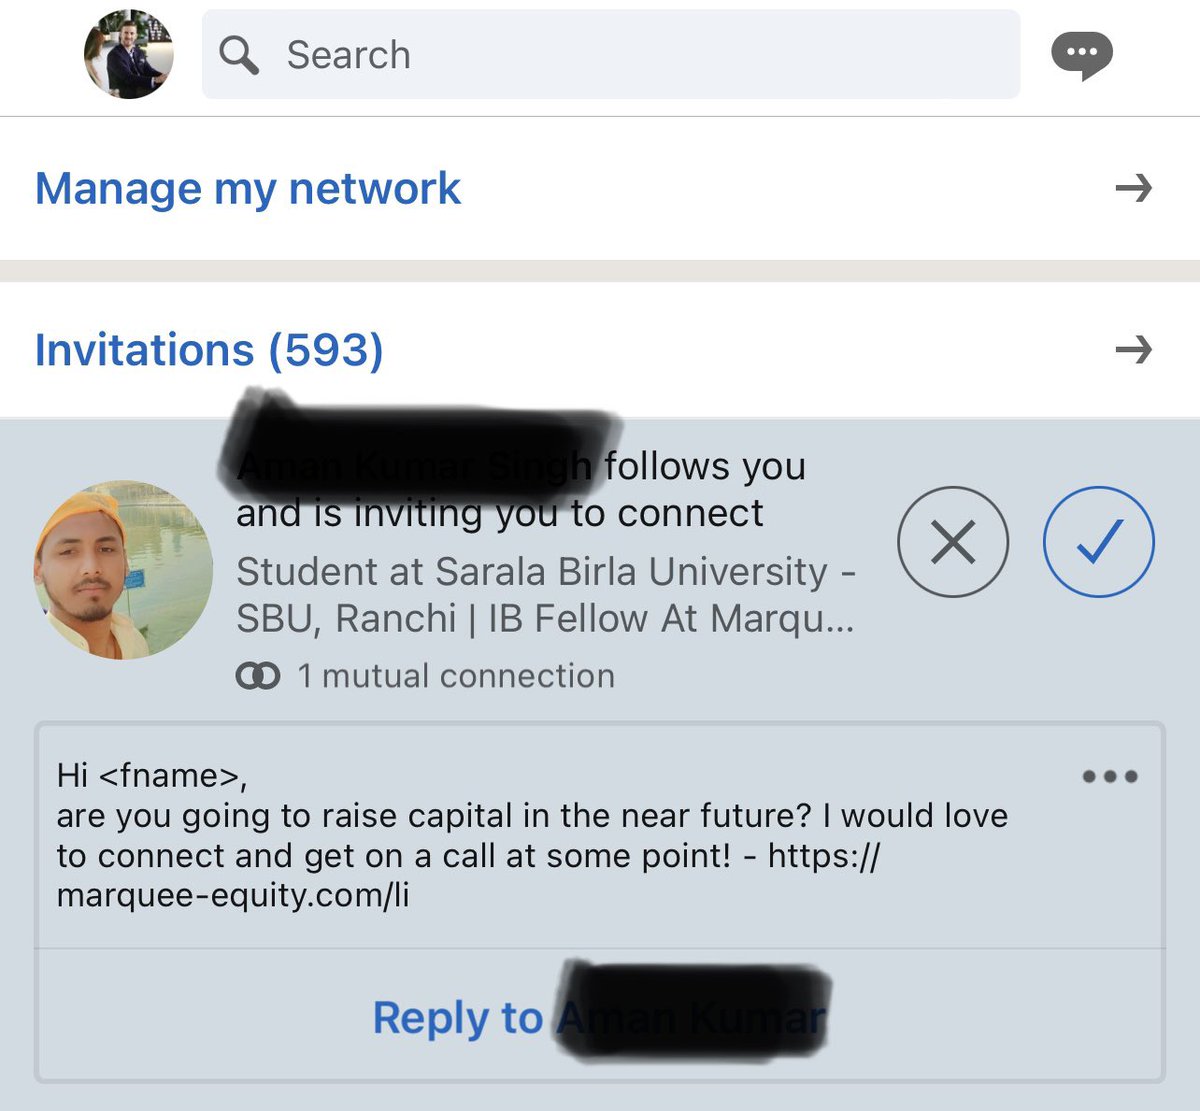 Loving these super personalized @LinkedIn connection requests! 😍 #networking